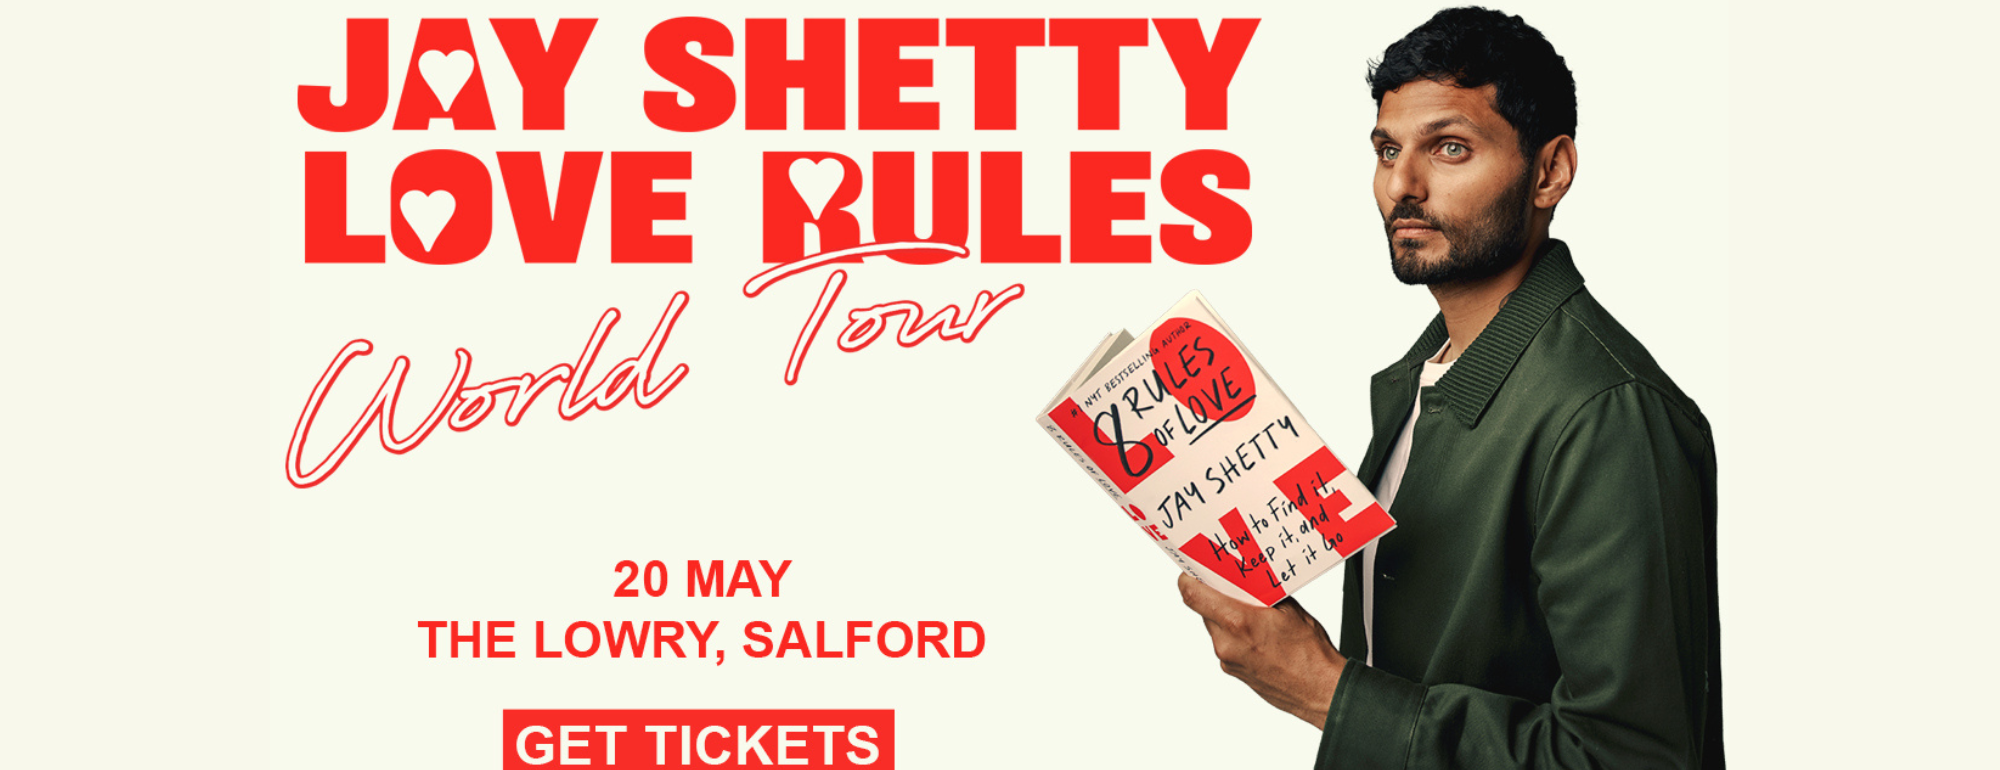 Jay Shetty World Tour Love Lives! What's On The Lowry